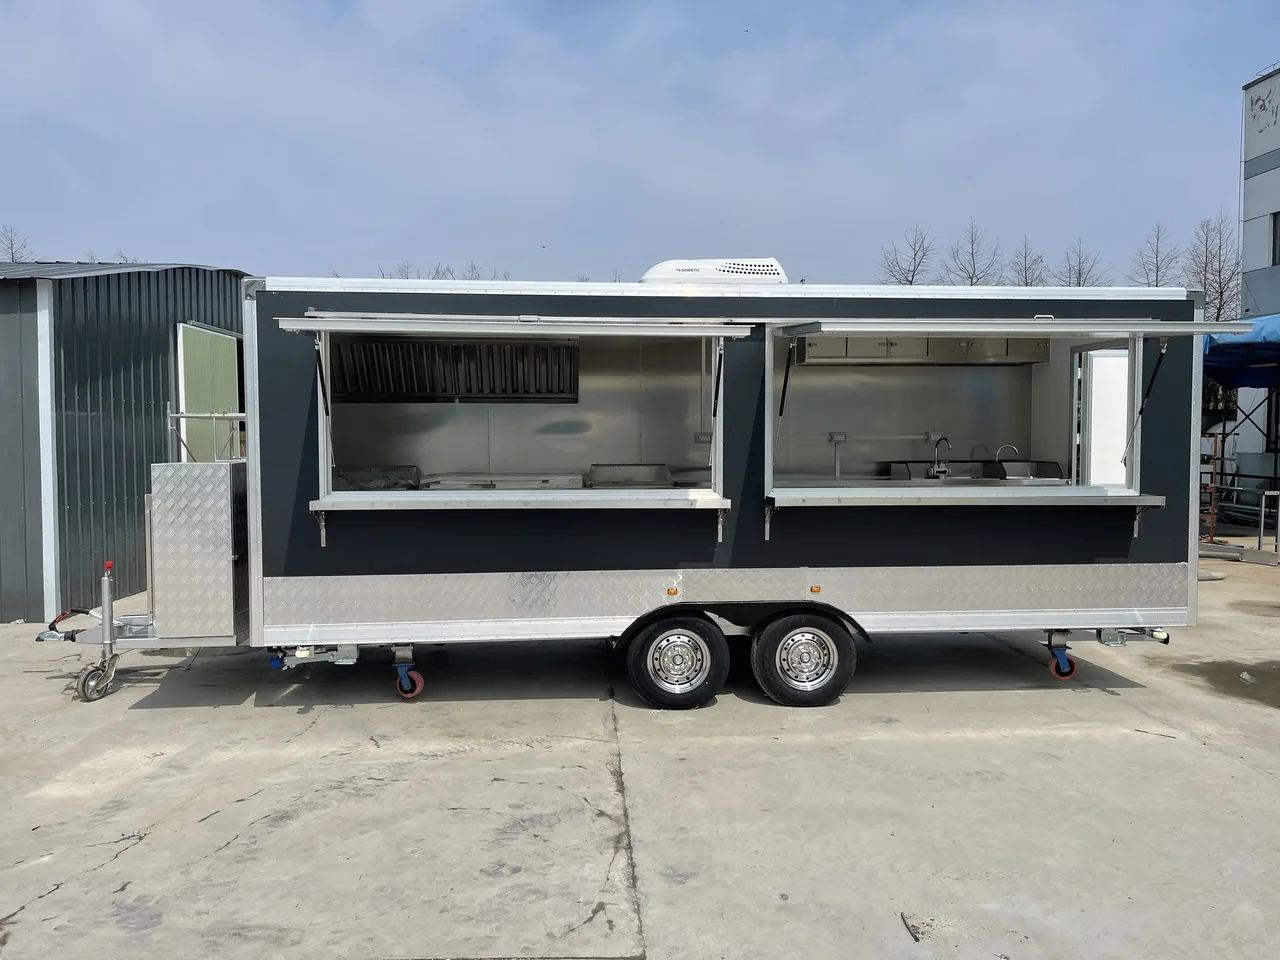 Catering trailers for sale near me